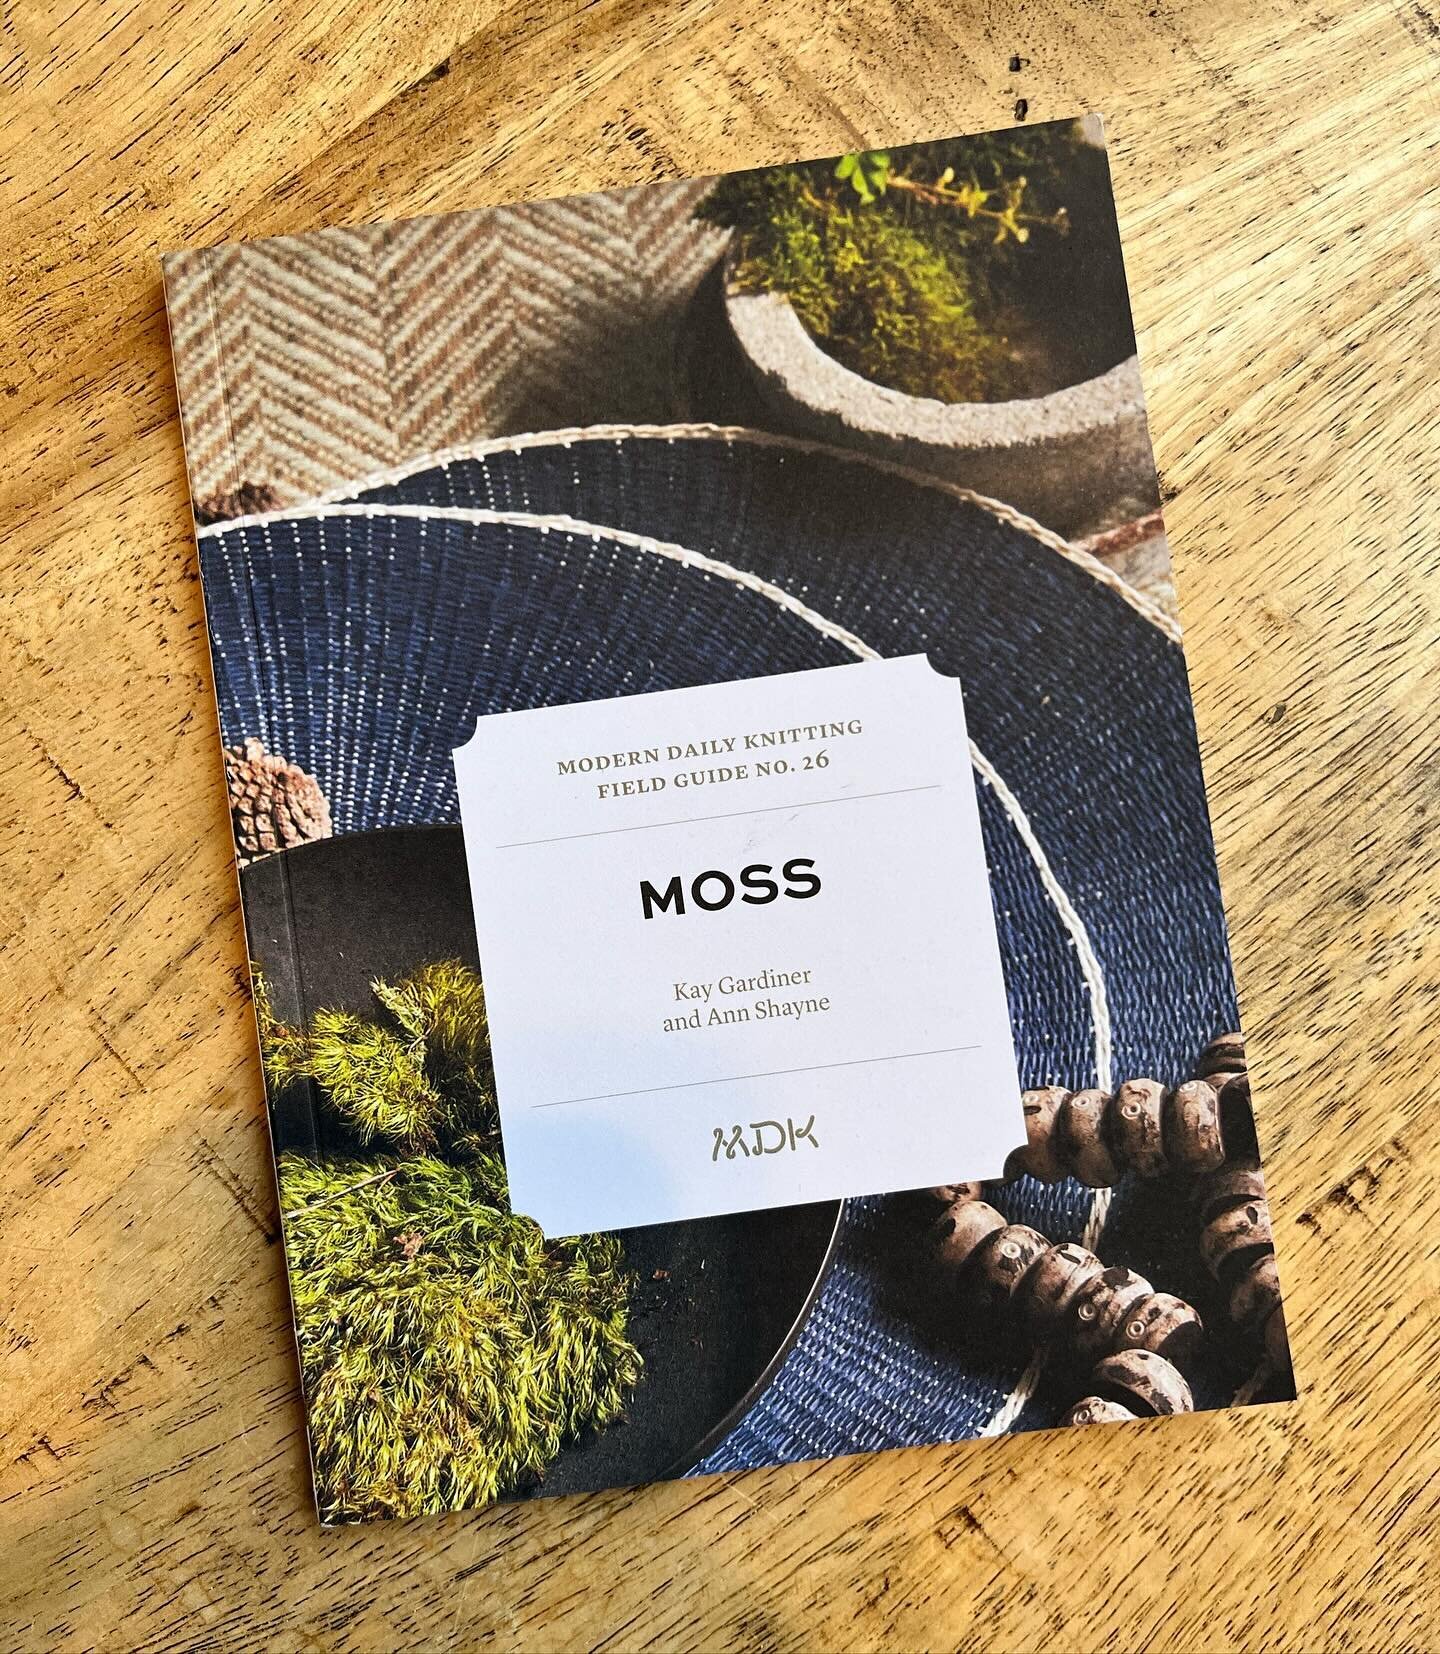 Happy #mdkfieldguide Friday everyone!

We know all our Lopi-loving friends will be especially delighted with this latest @modern.daily.knitting field guide: Moss 💚💚💚

Looking forward to cooking up some Lopi Fun soon!

#knitting #knittersofinstagra